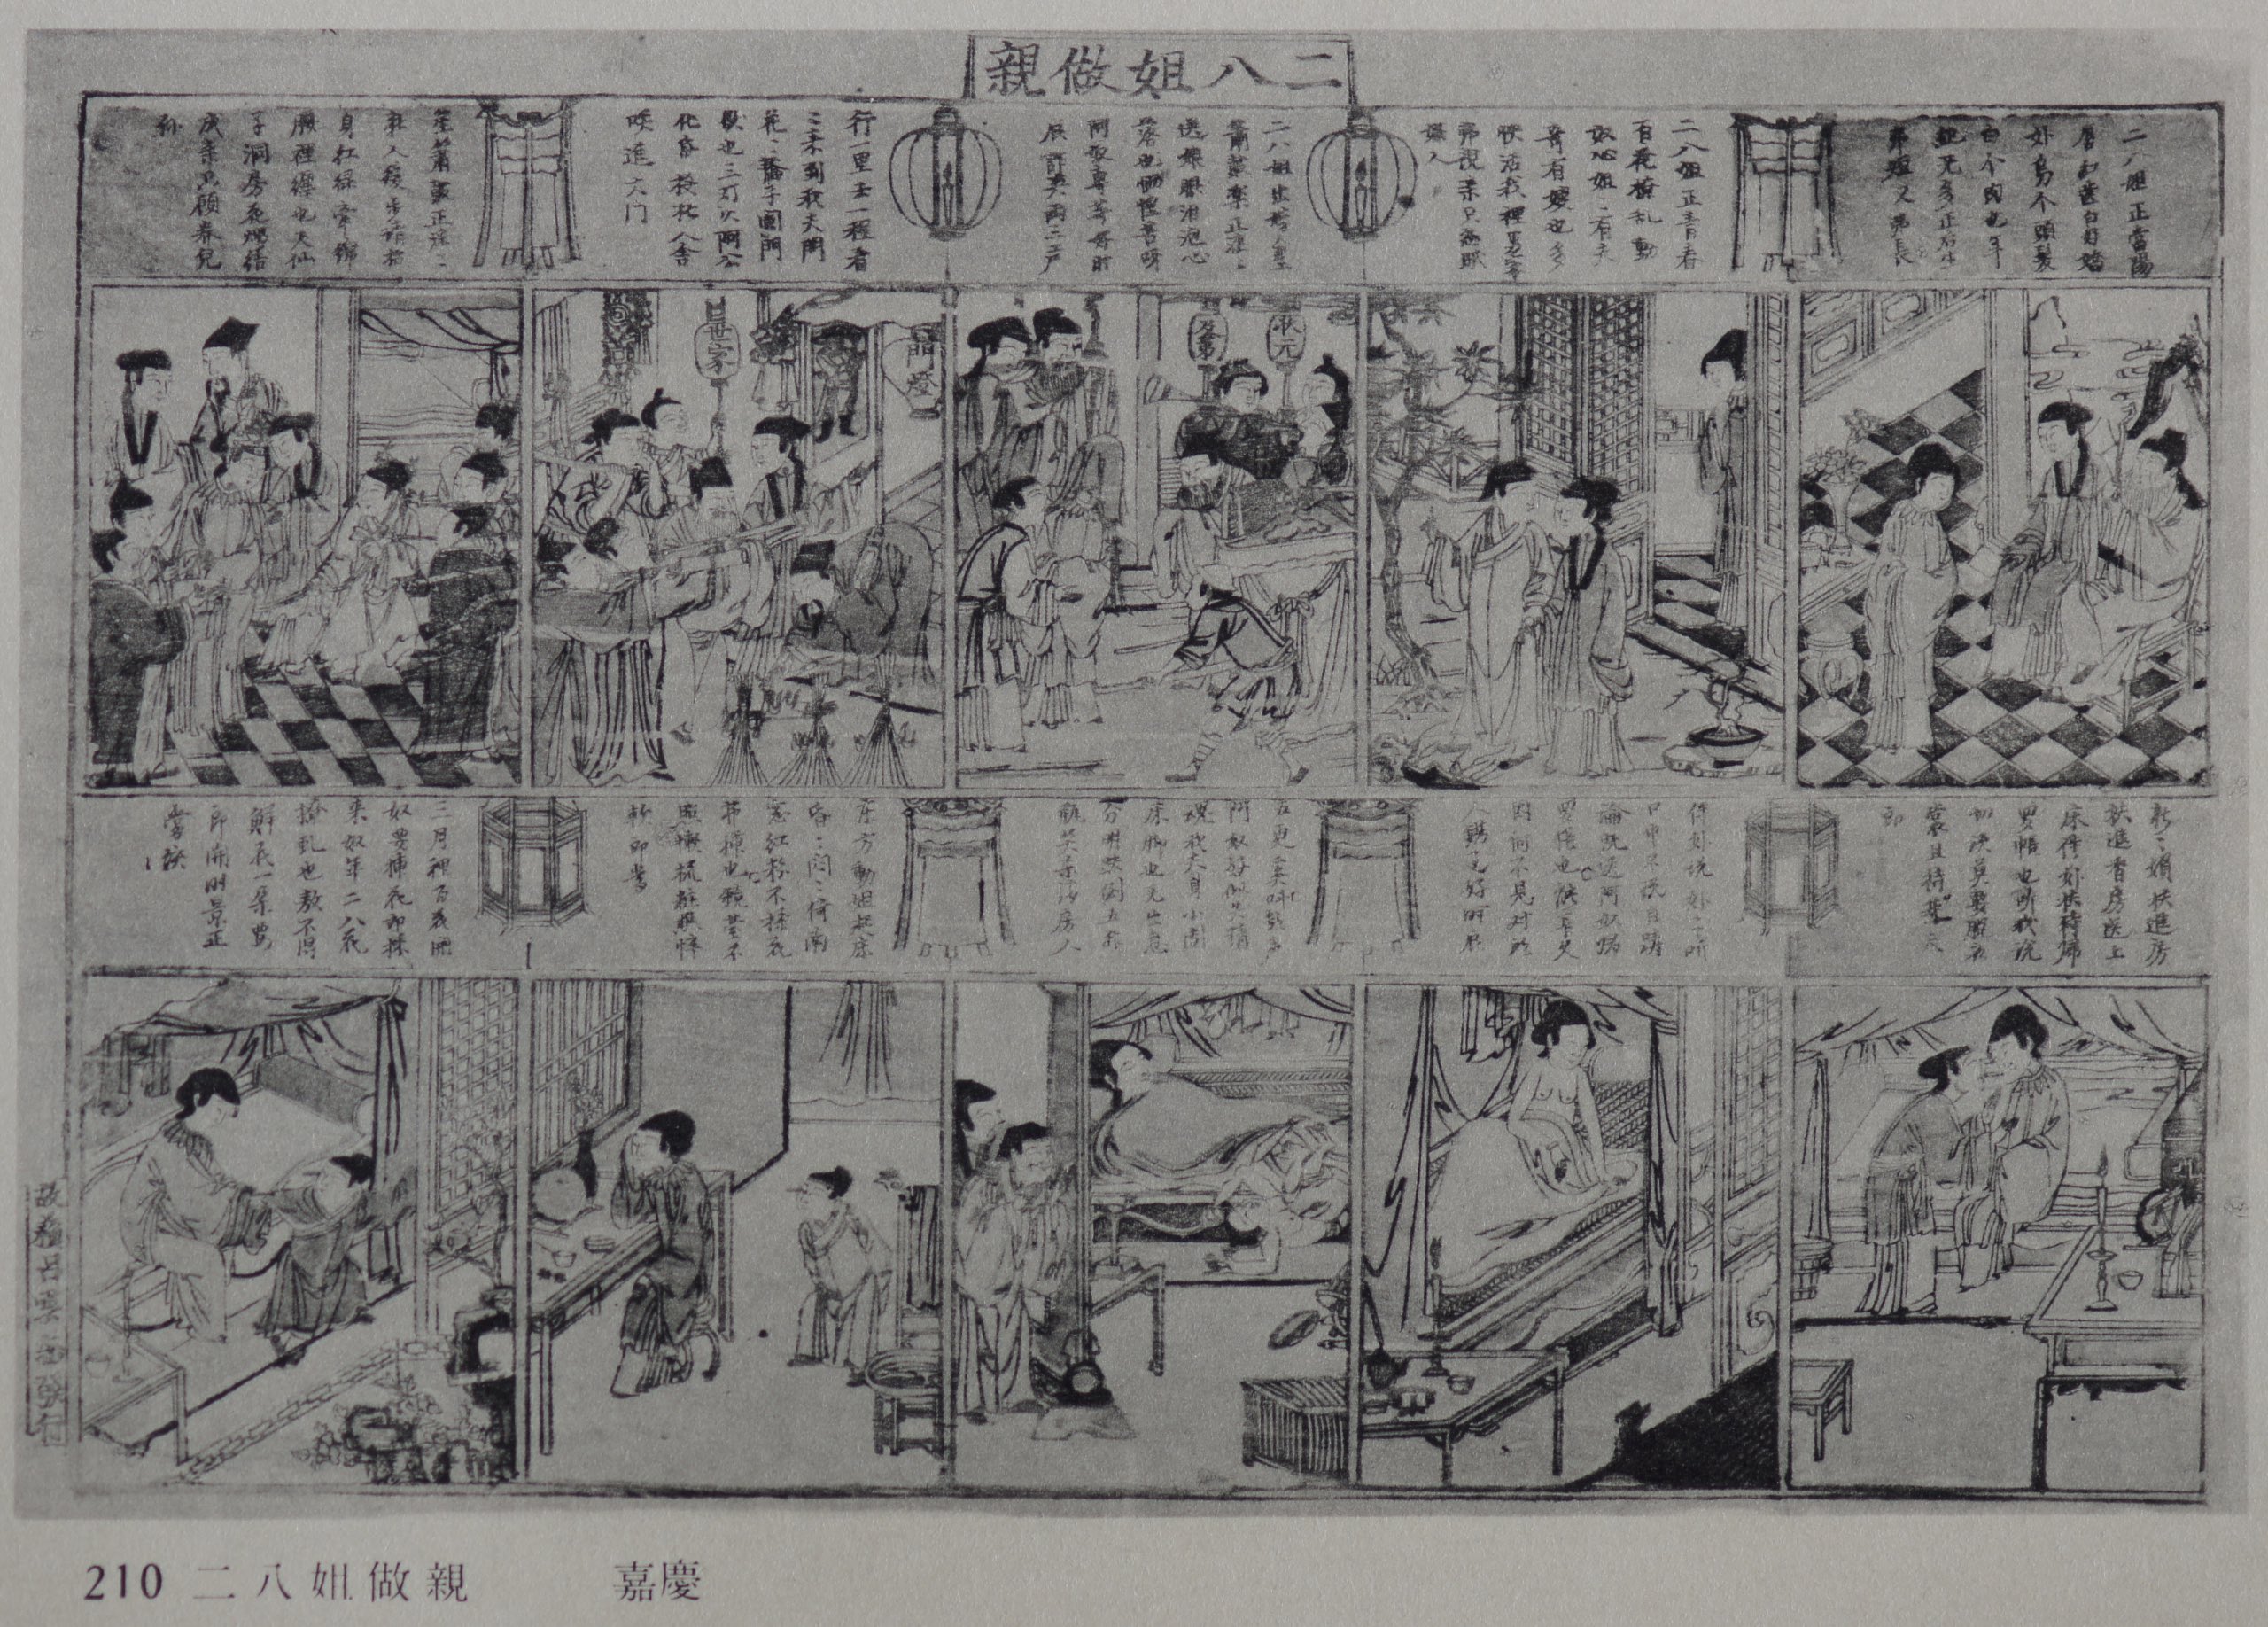 Fig 6. Erba Jie Zuo Qin 二八姐做親 Twenty Eight Sisters by Marriage. Signed Gusu Lü Yuntai Faxing 姑蘇呂雲台發行. Collection unknown. 